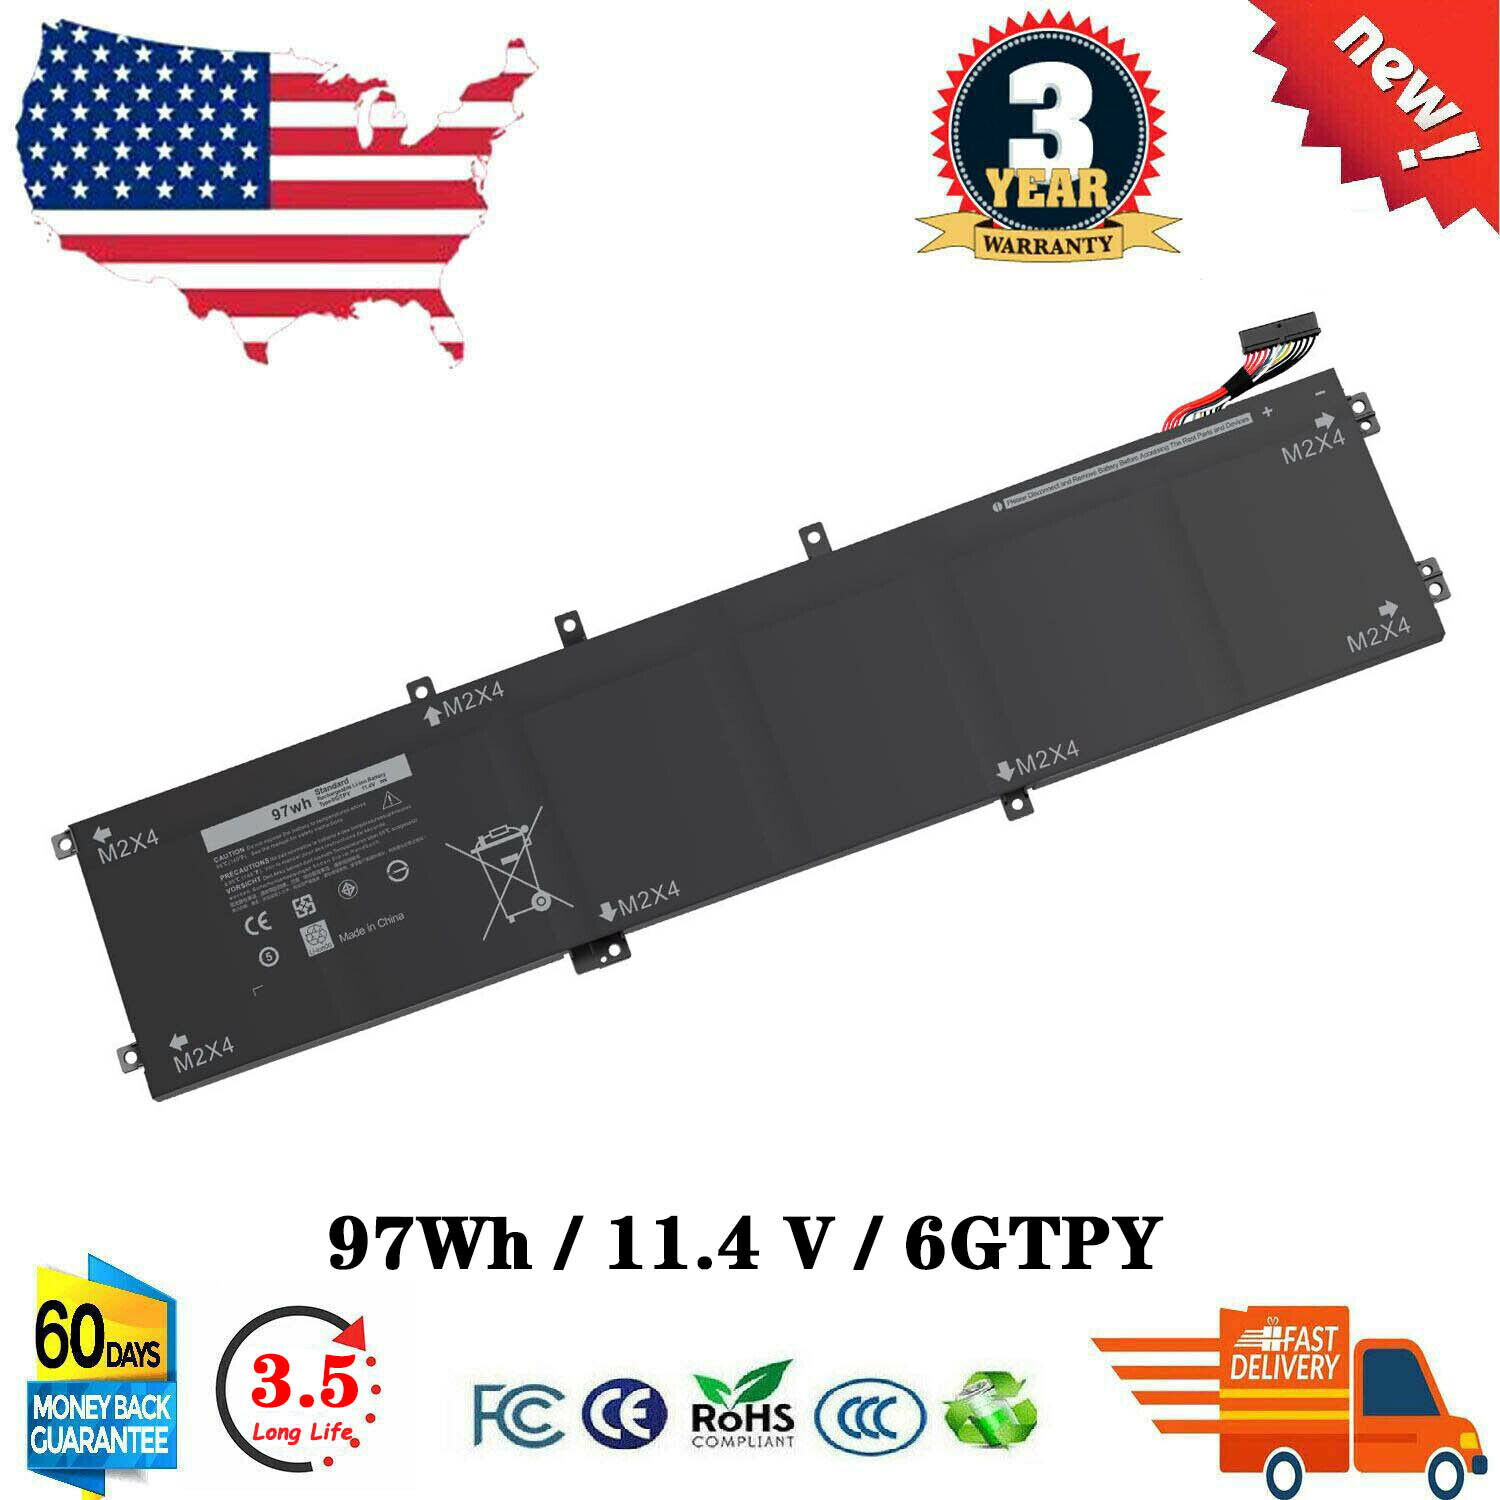 6GTPY Battery For Dell XPS 15 9560 9550 9570 7590 Precision 5510 5520 5530 5540